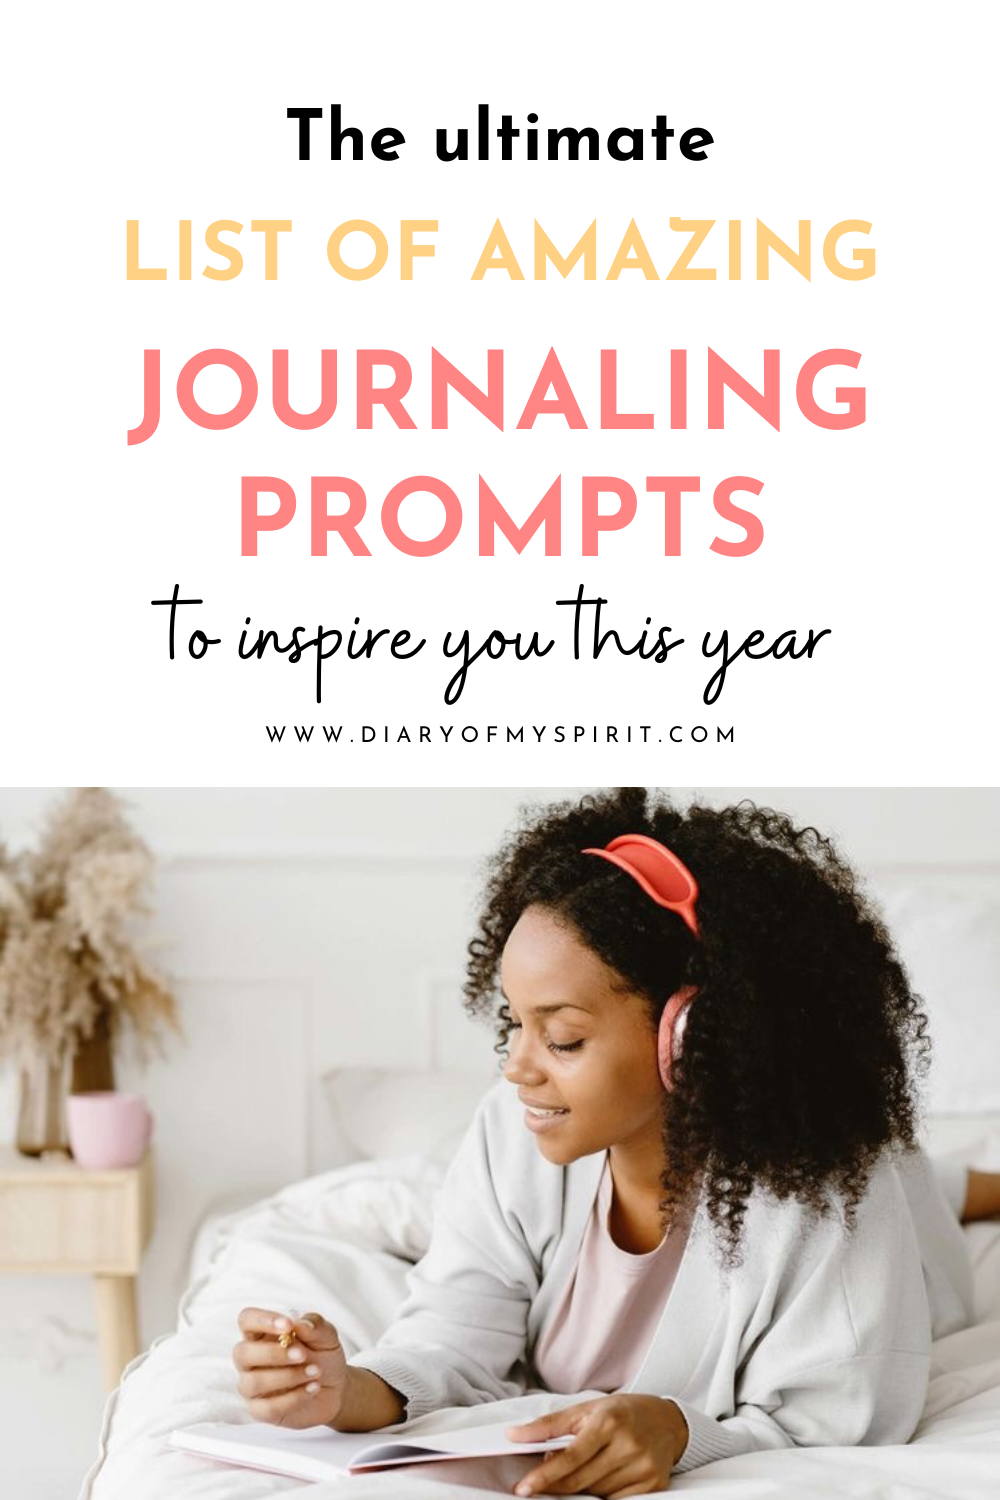 best journal prompts. journaling prompts. journal prompts for mental health. journal prompts for self discovery. prompts journal. journals prompts. journal prompt. journalign with prompts. writing prompts. prompting journal. prompt journal. journal question. prompts for journaling. journal topics. journaling suggestions.